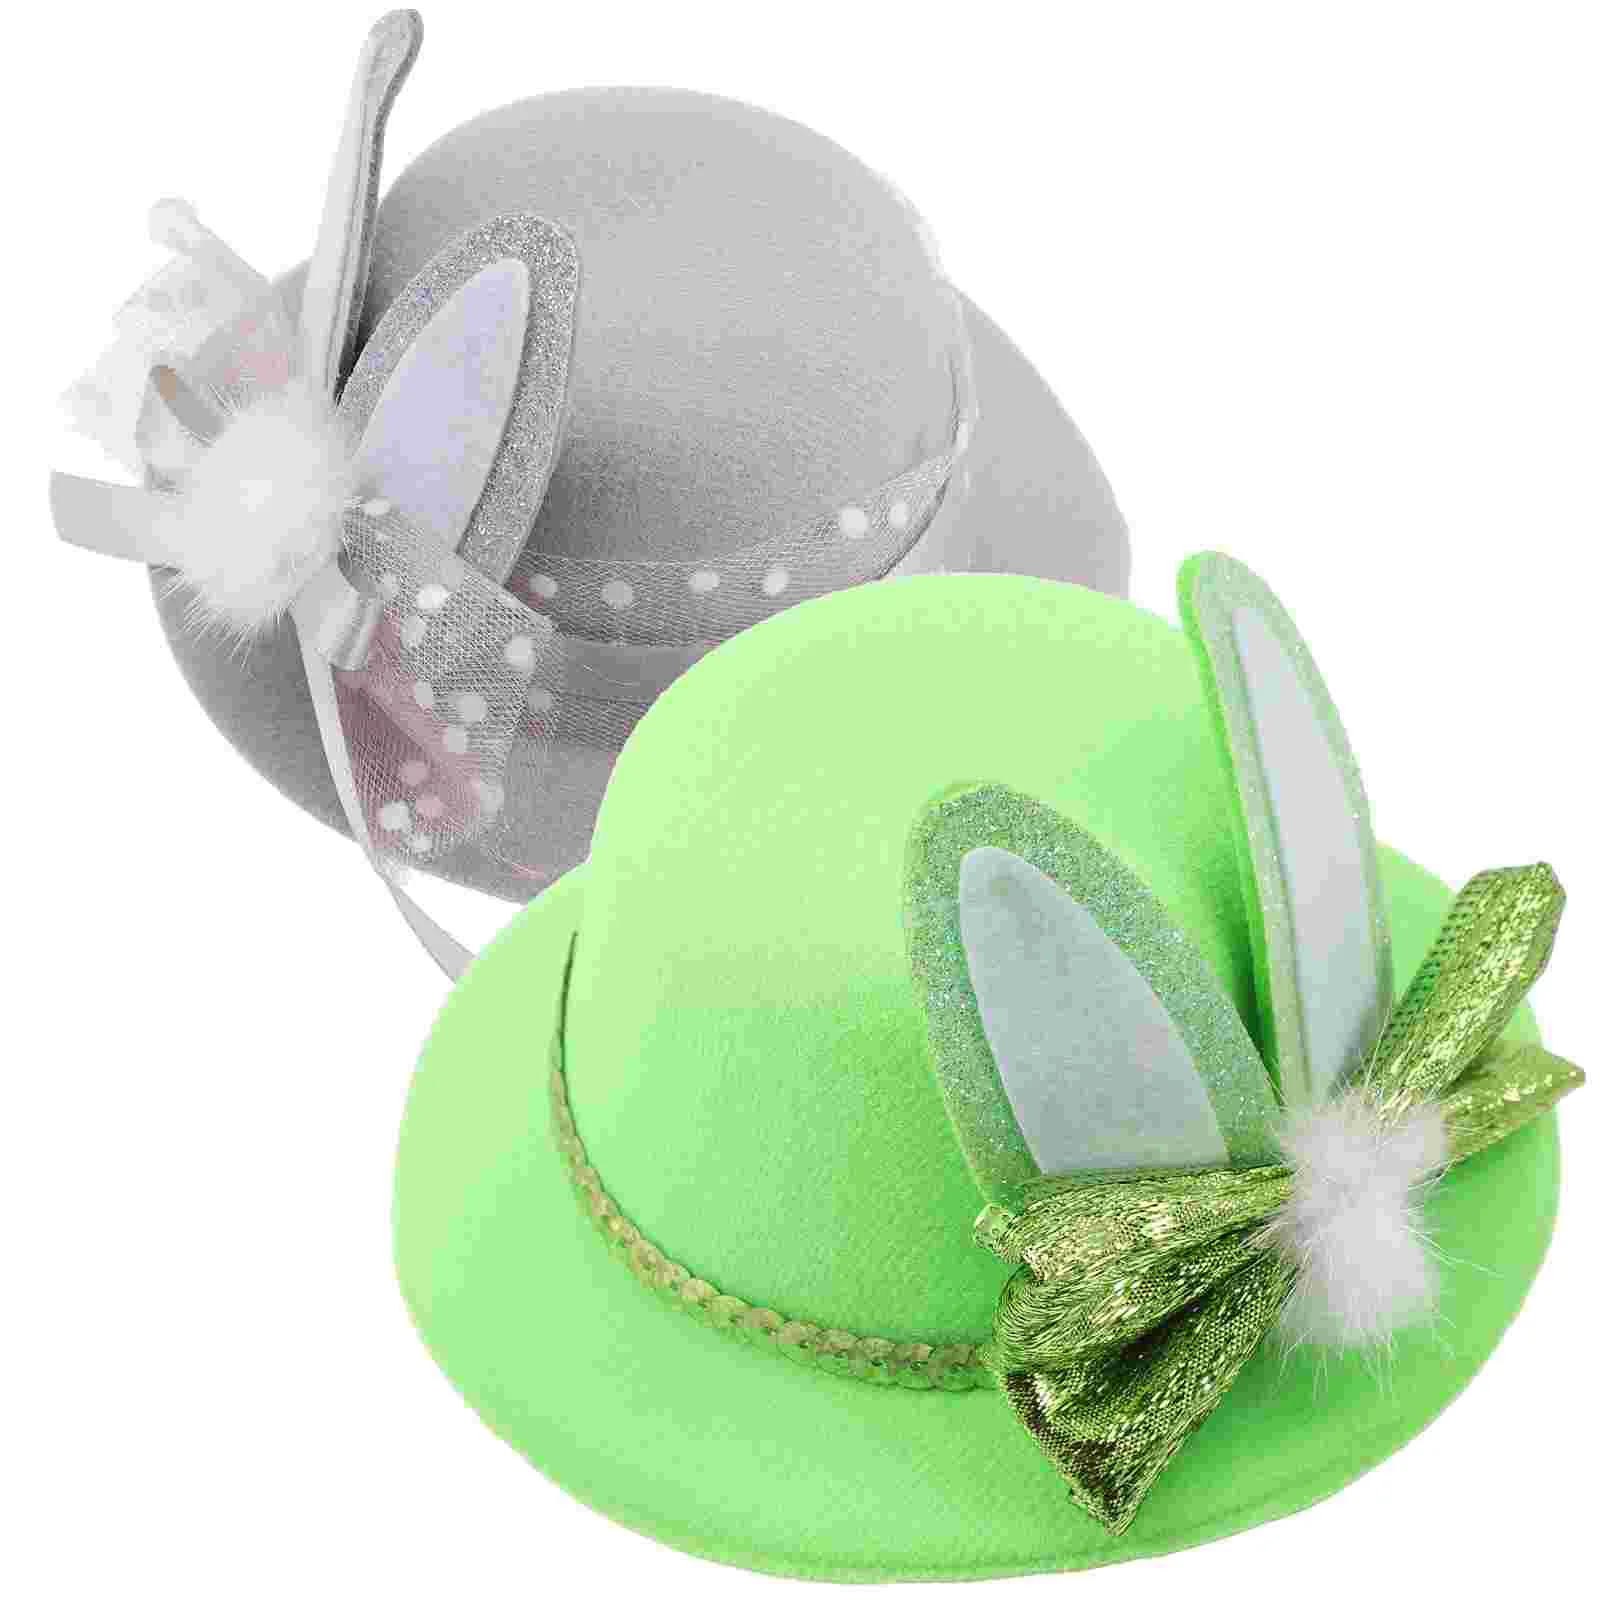 

Hat Easter Hair Bunny Rabbit Costume Barrettes Headdress Accessories Party Clip Ears Clips Shaped Rabbits Animal Topper